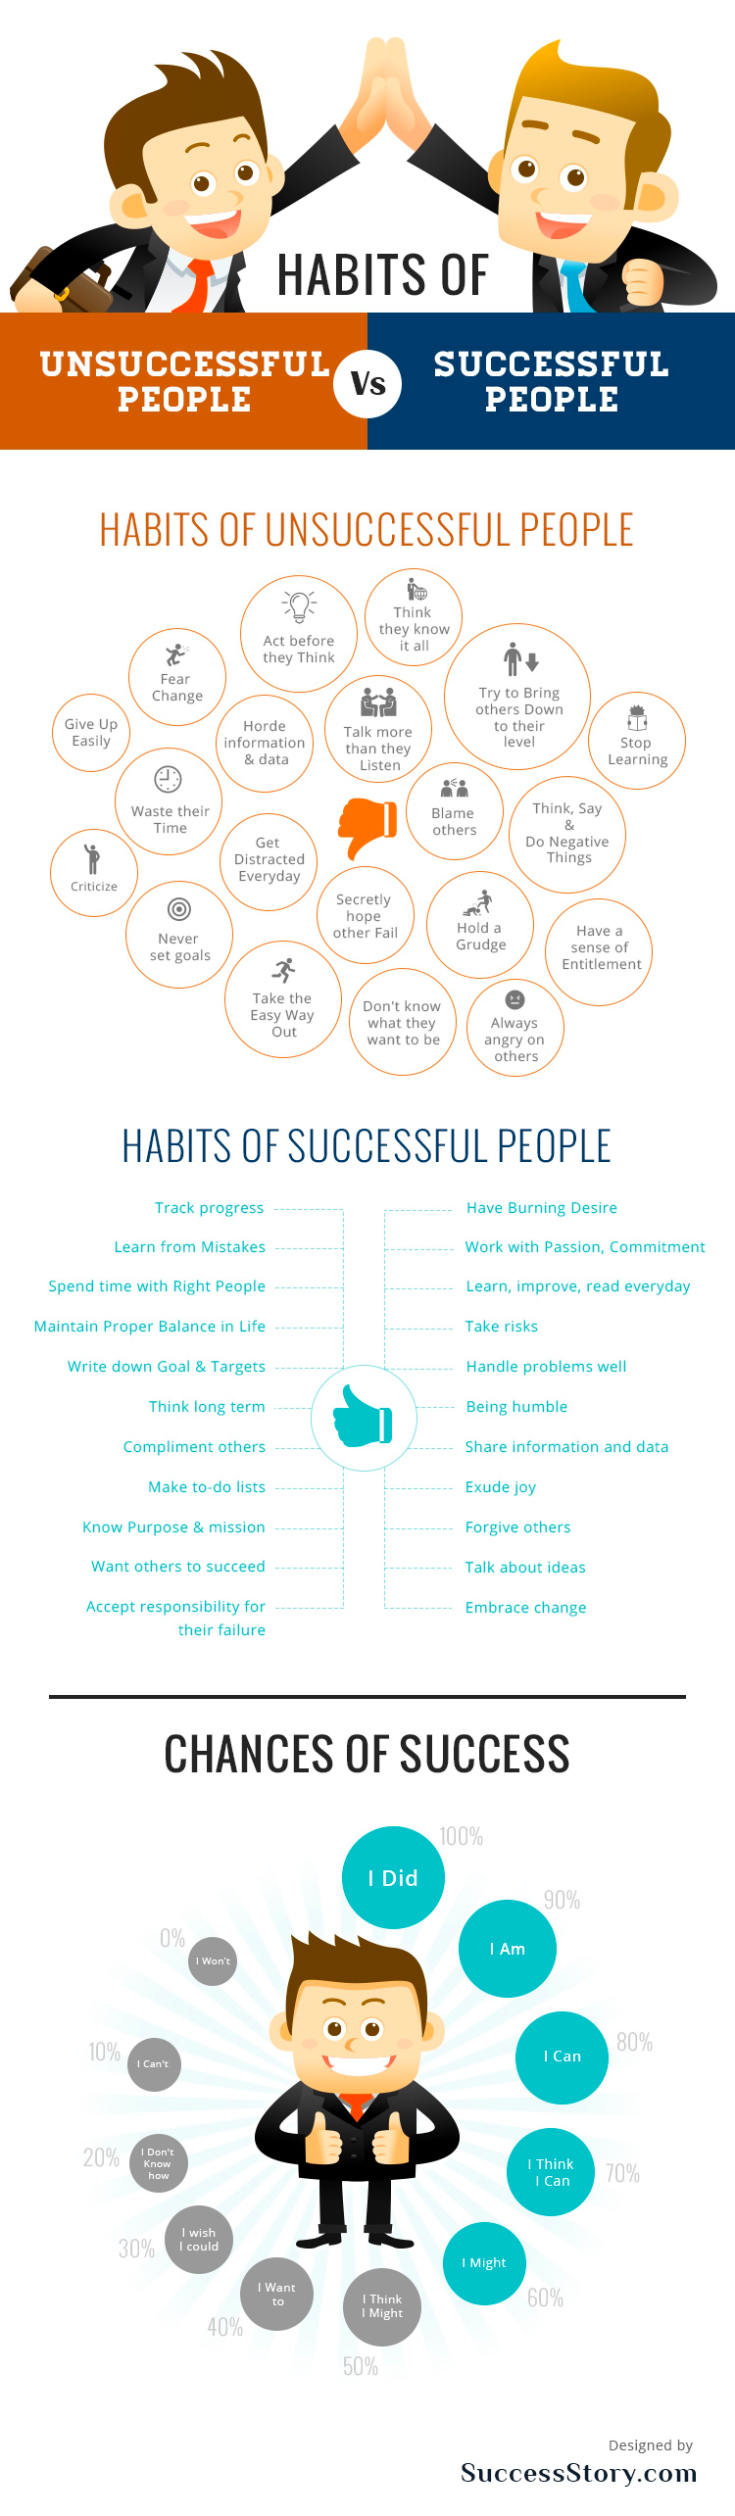 habits of successful and unsuccessful people